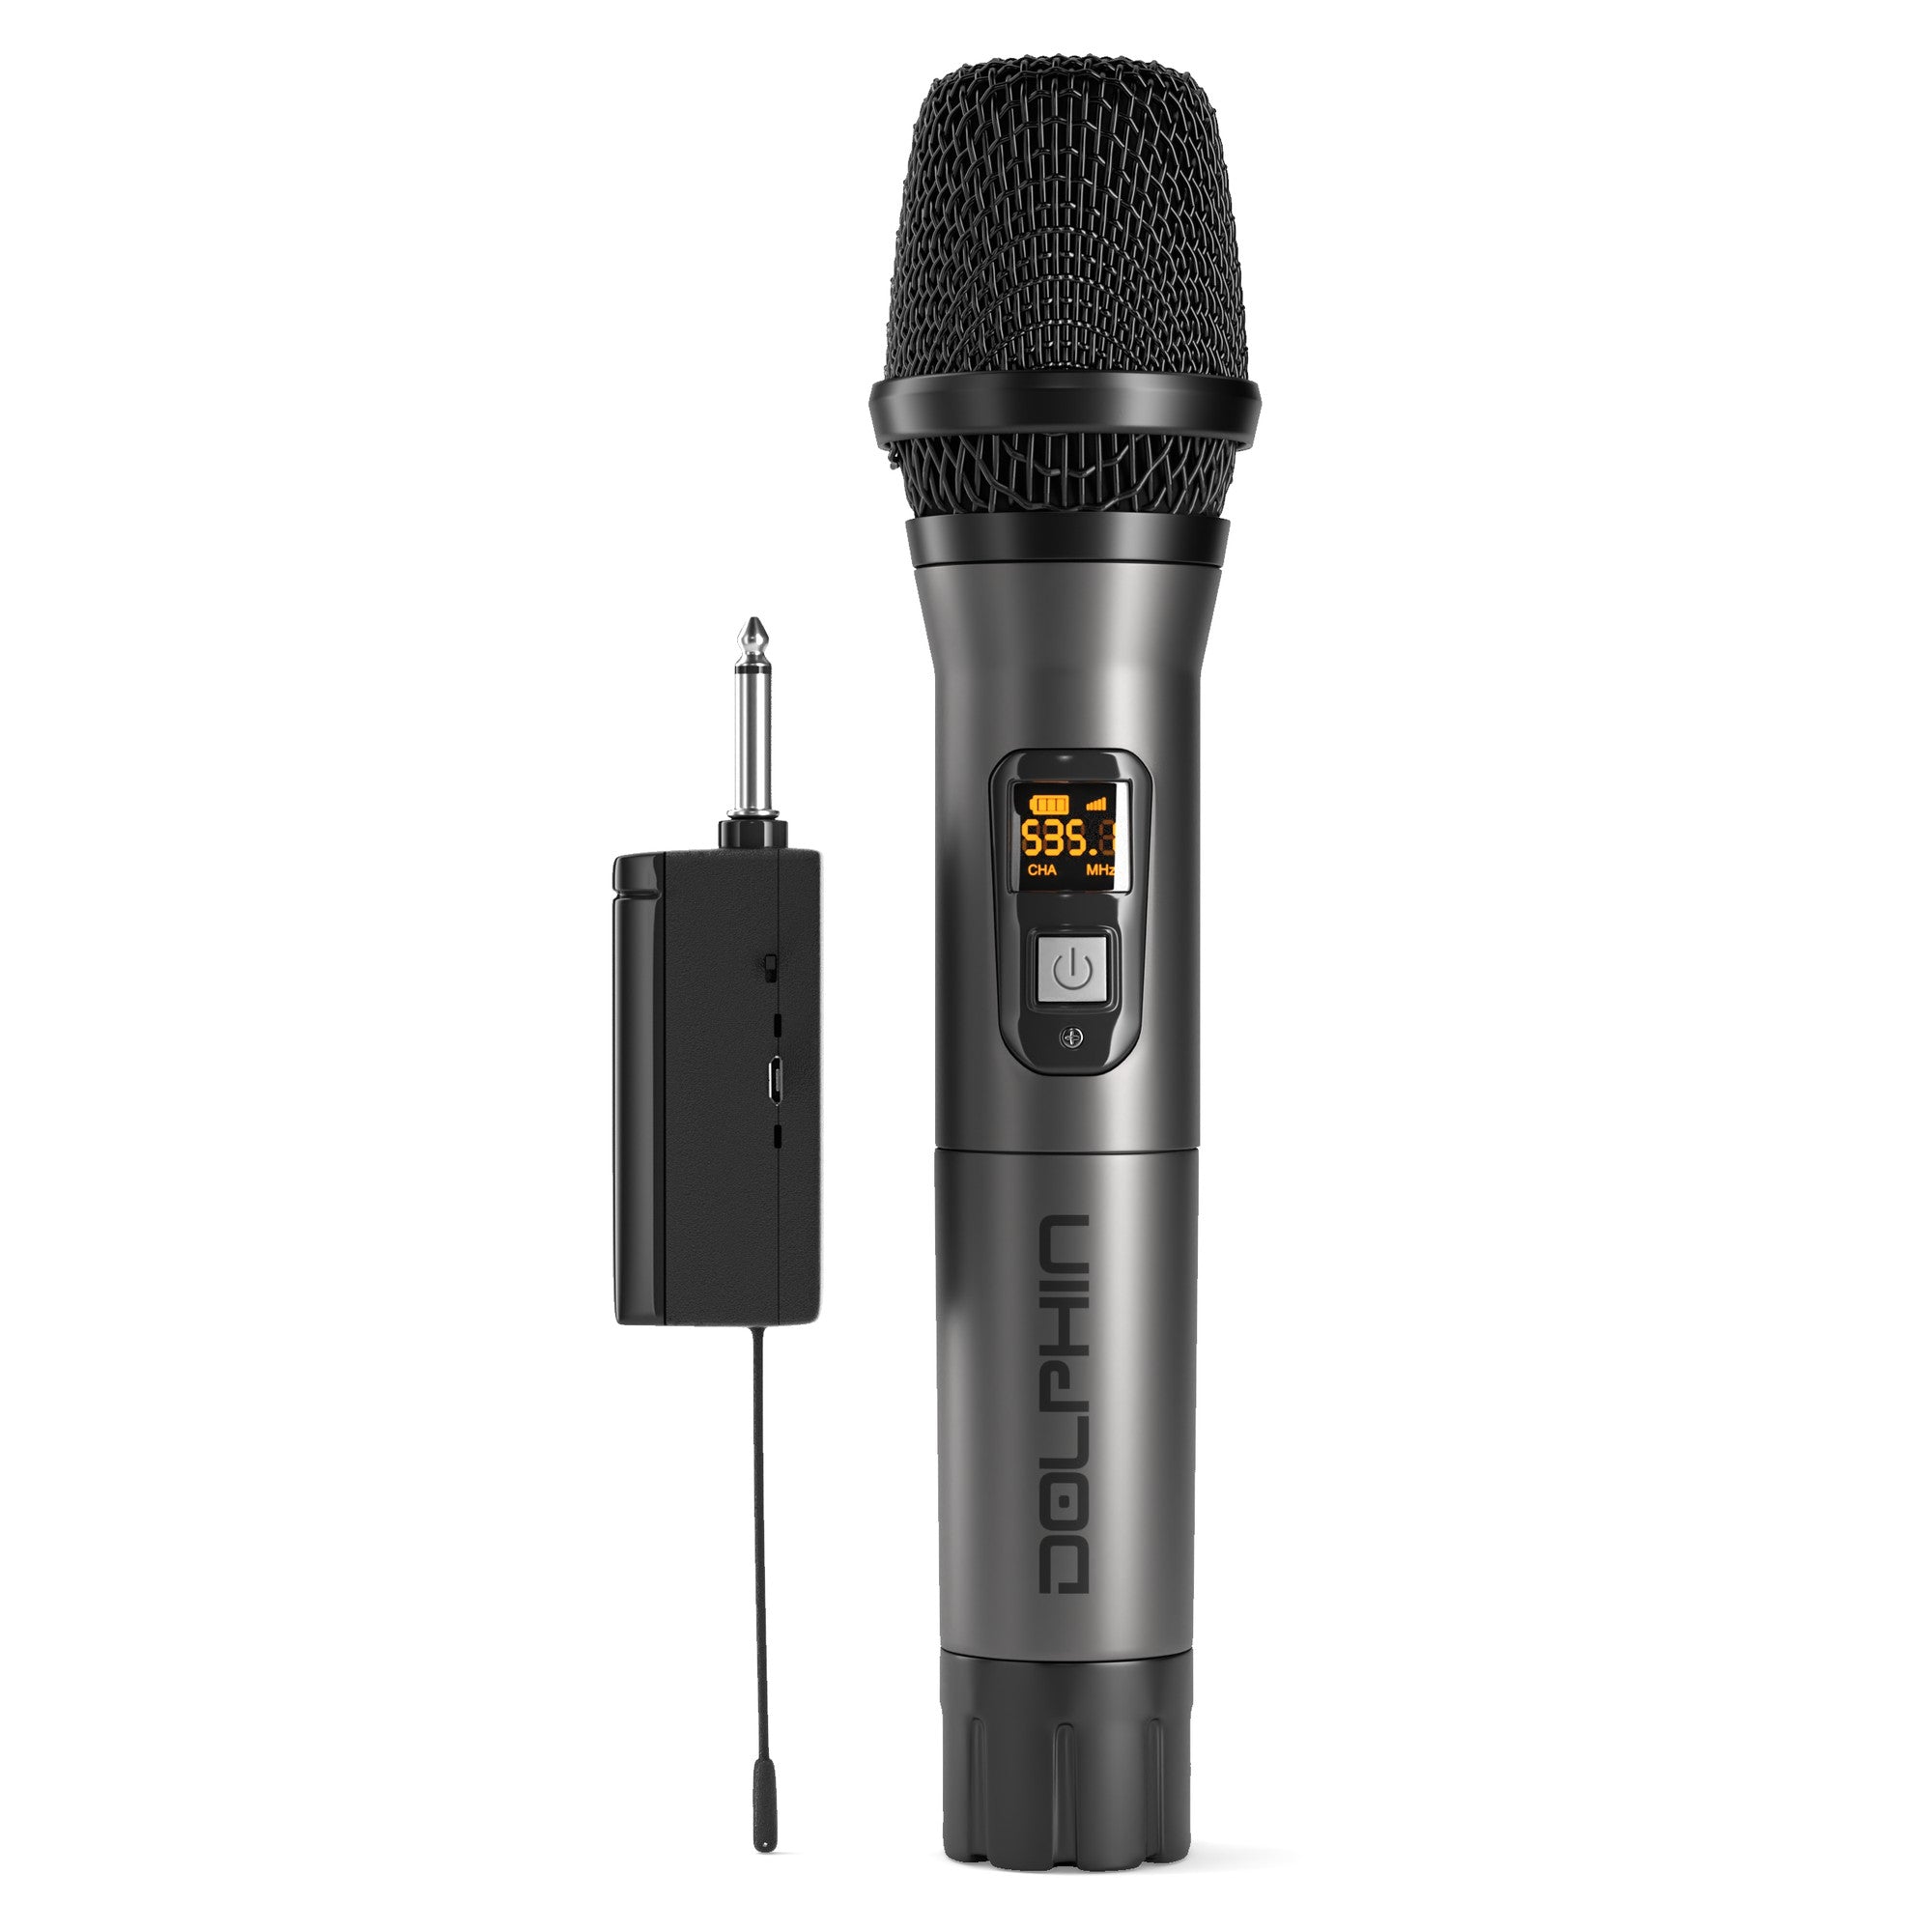 MCX-10 wired microphones